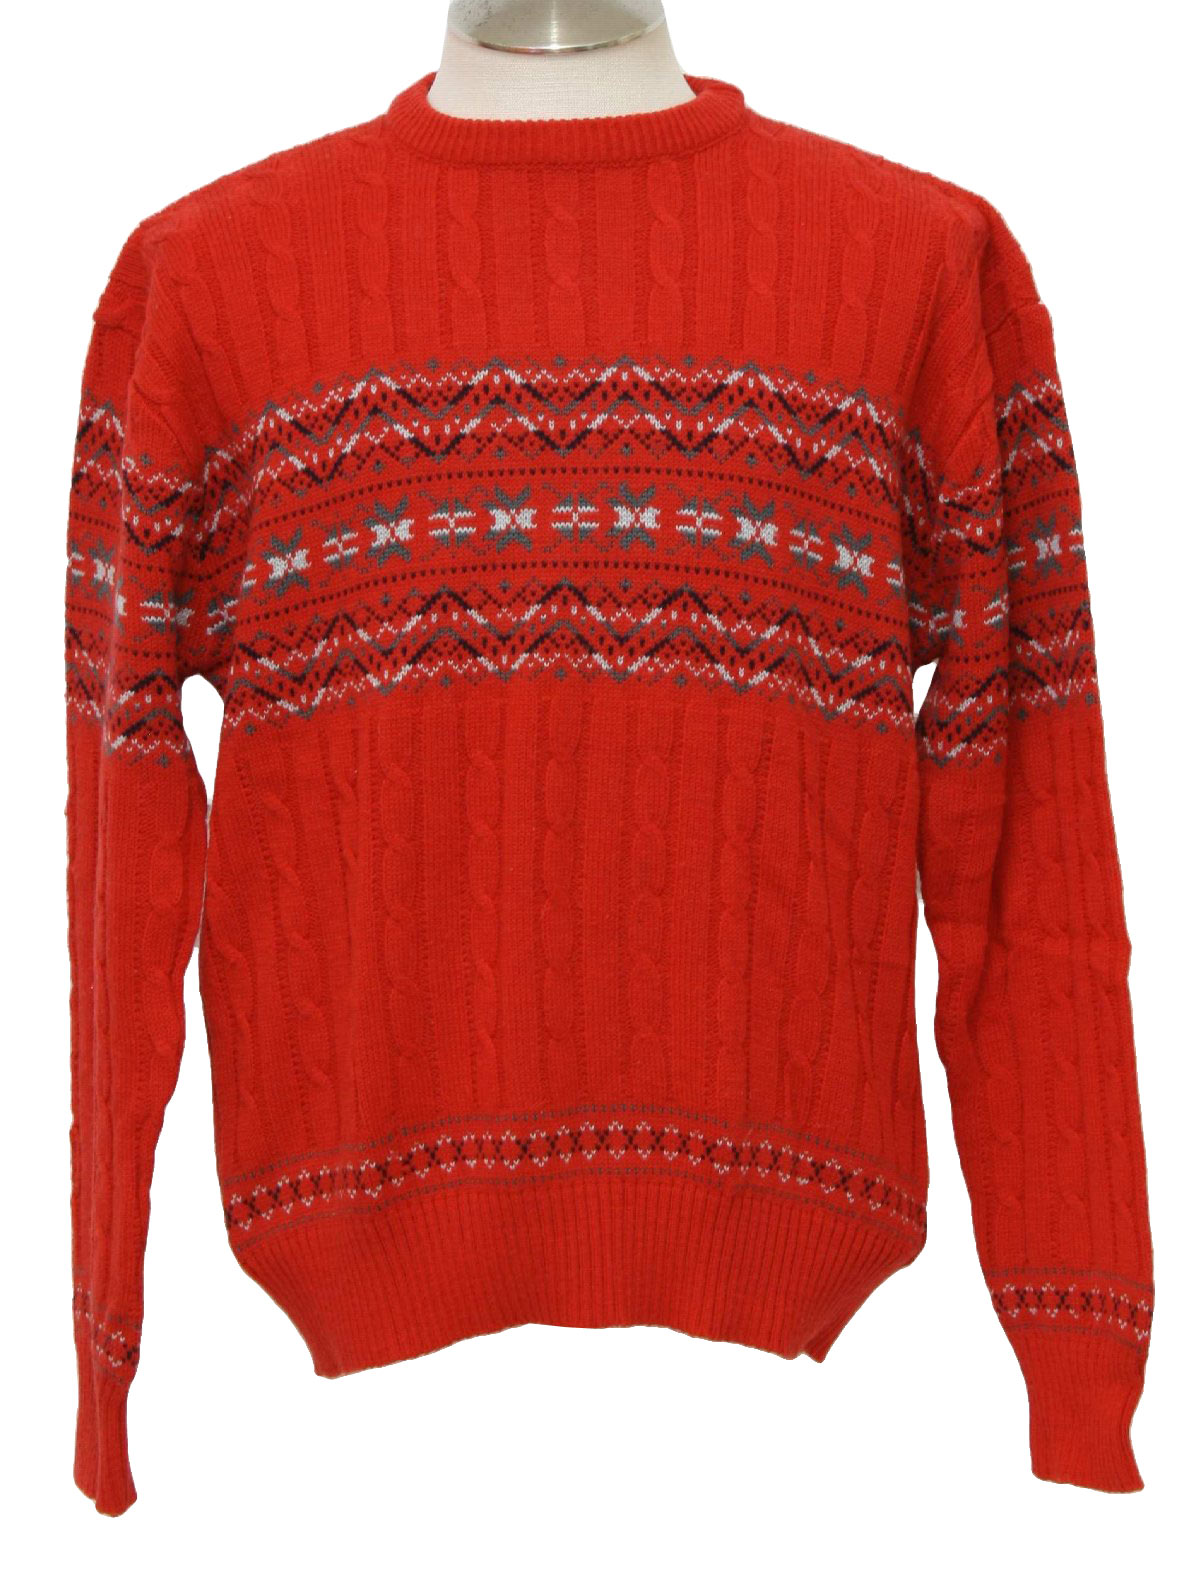 Retro Nineties Sweater: 90s -Eleven Sixty Six- Mens bright red with ...